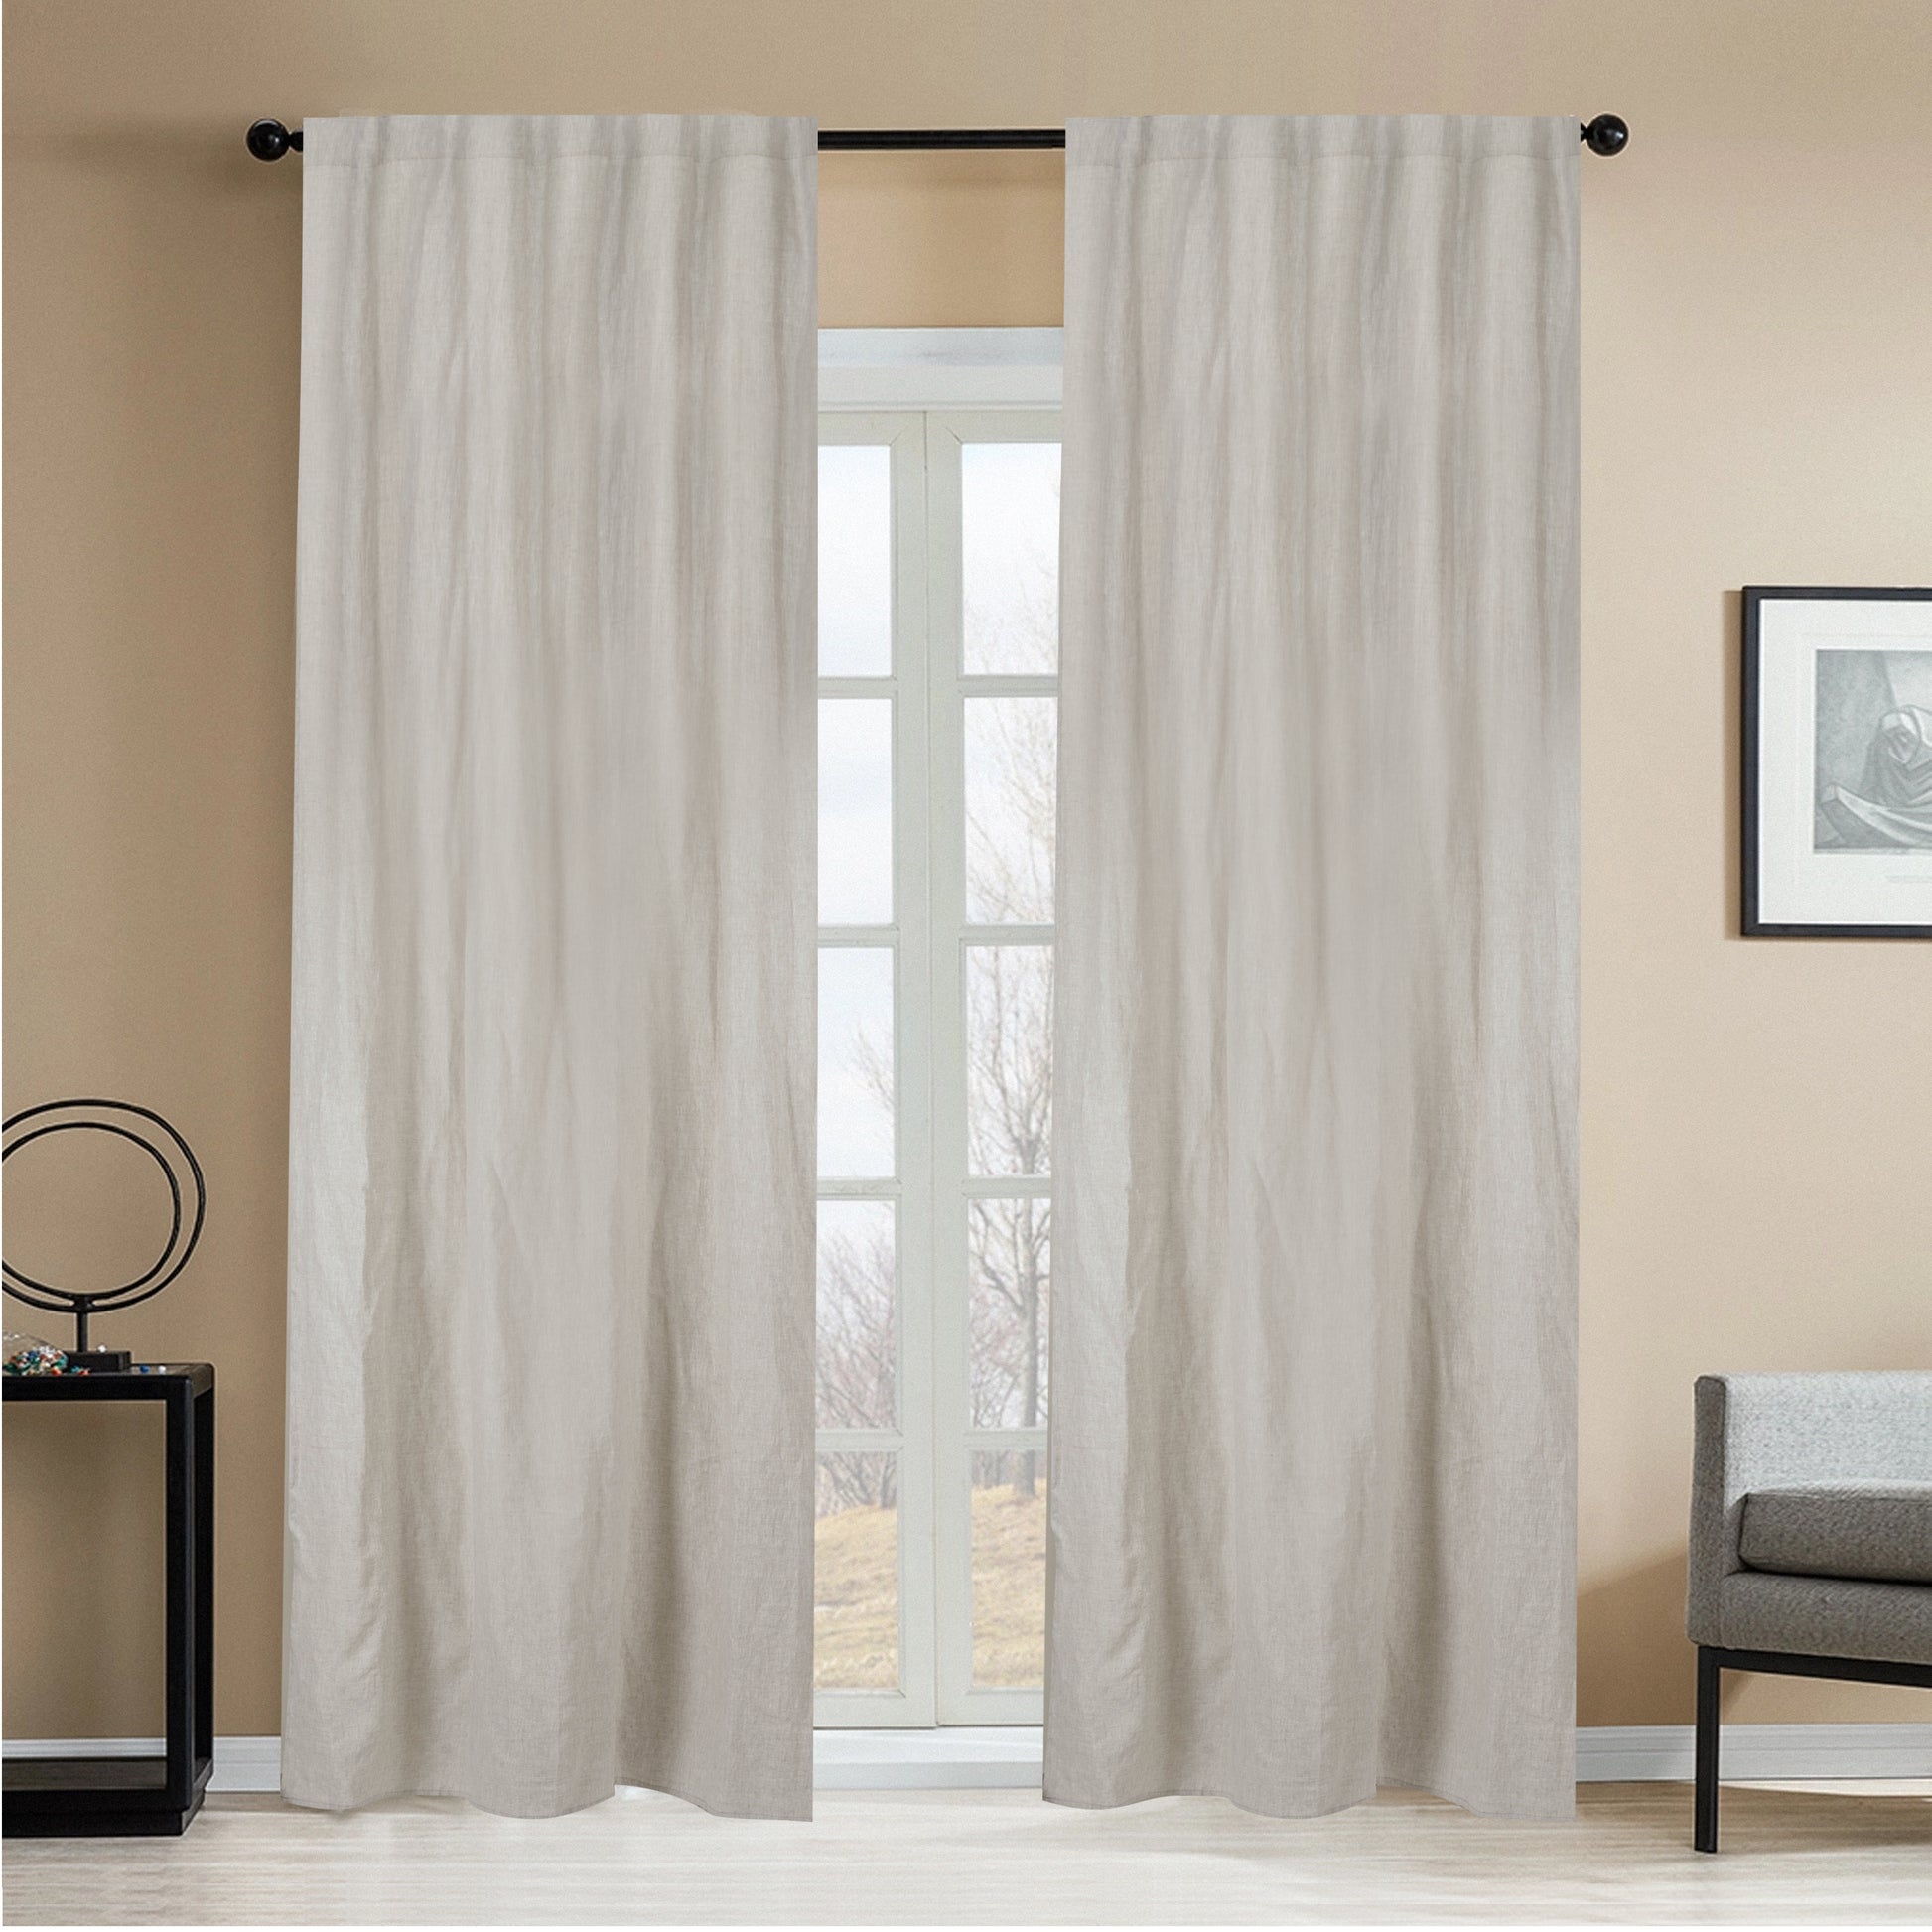 Newport Linen Curtain for bedroom decor in USA